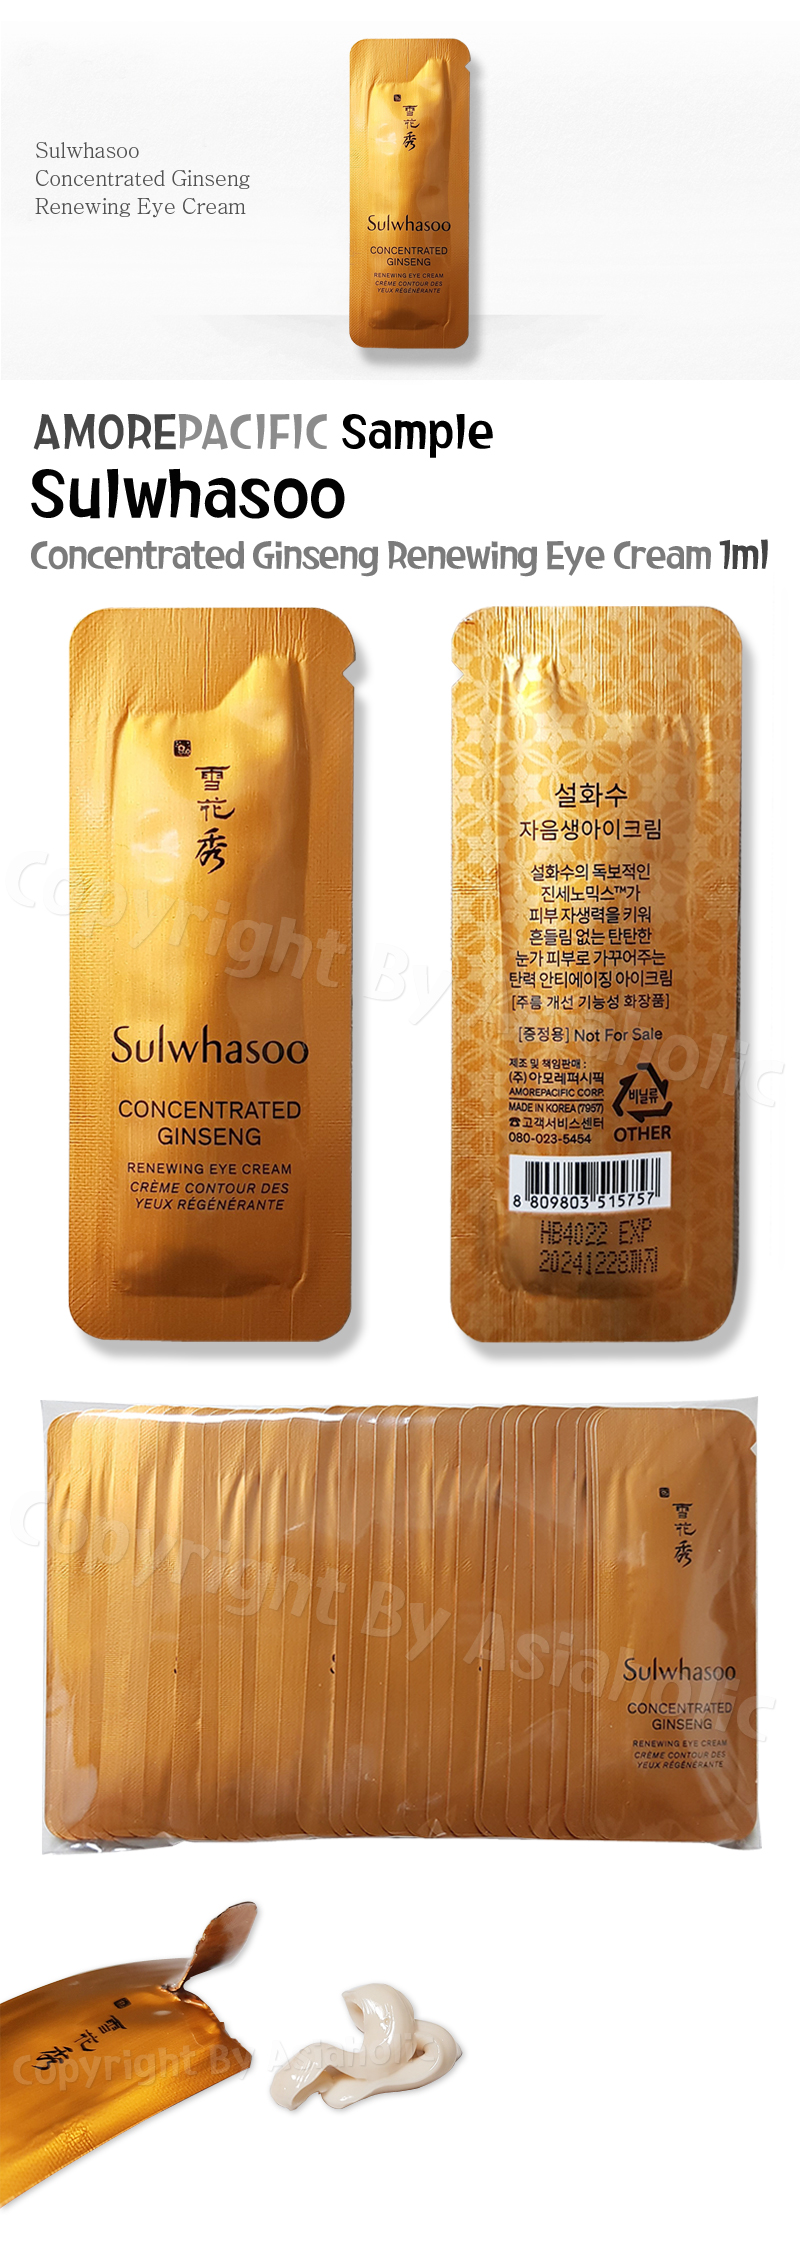 Sulwhasoo Concentrated Ginseng Renewing Eye Cream 1ml x 20pcs (20ml) Newest Version